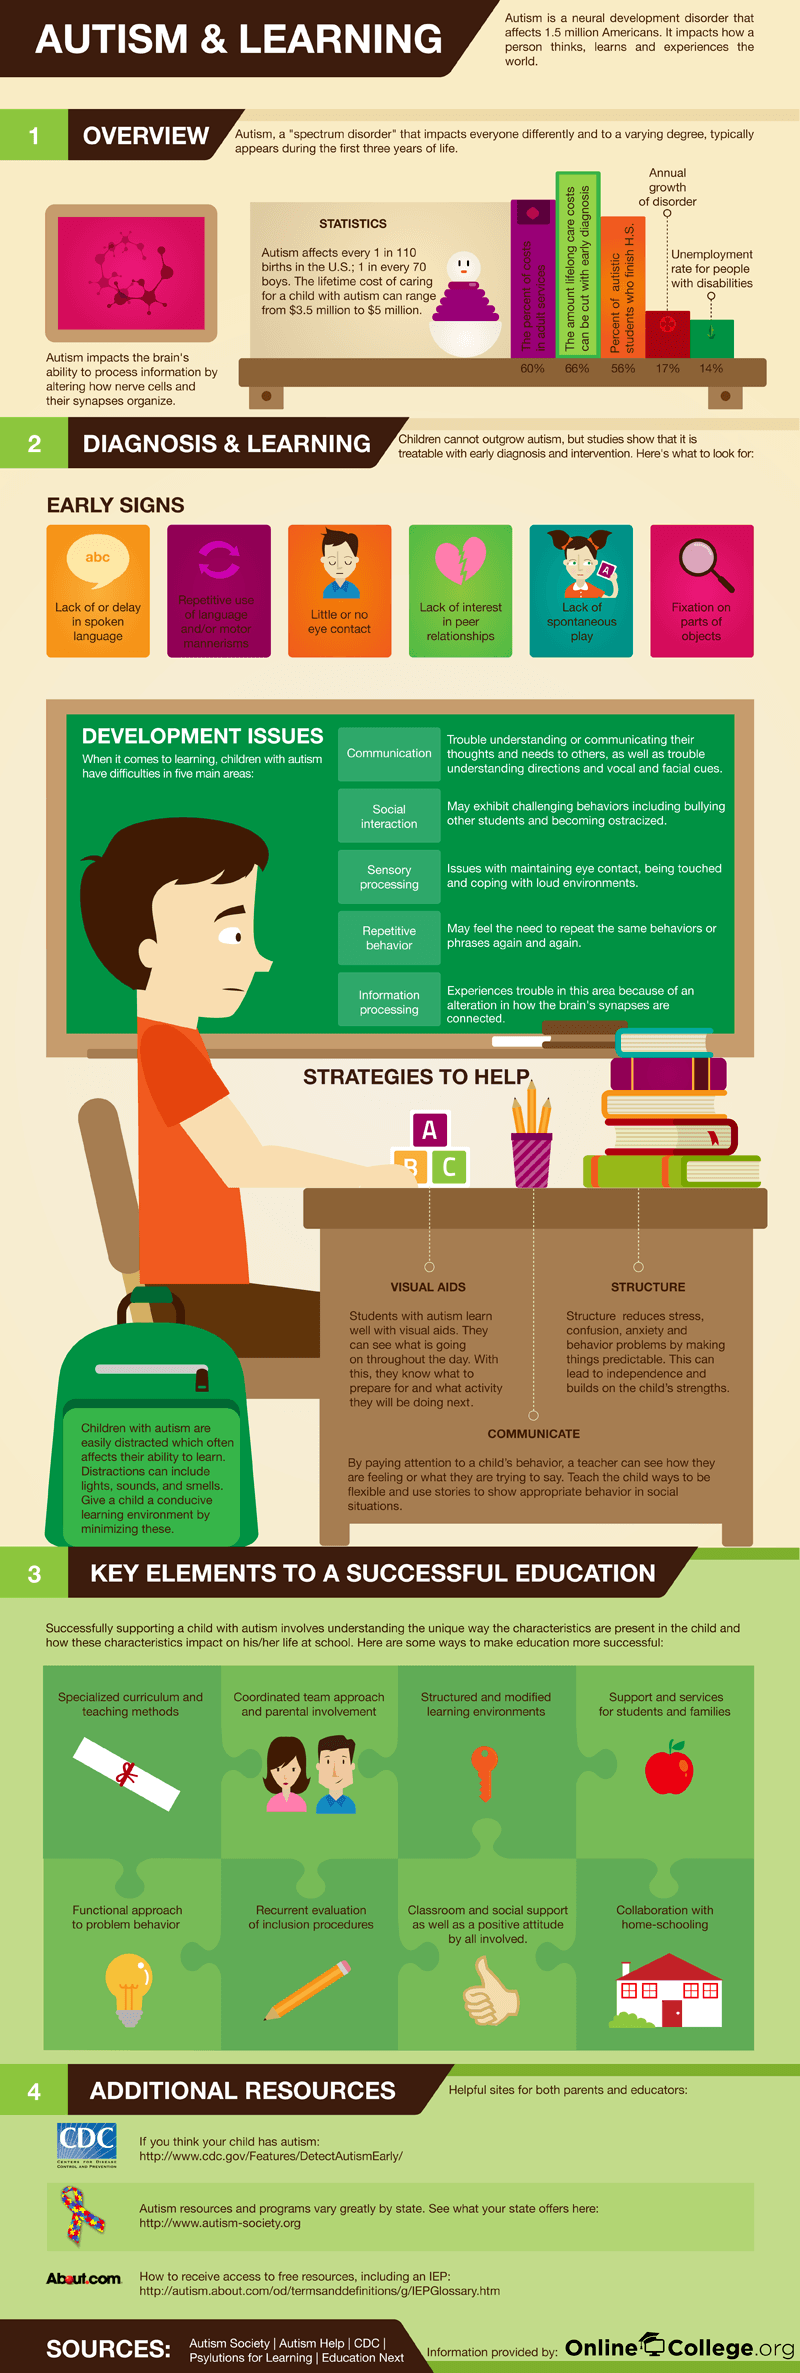 Autism-and-Learning-Infographic